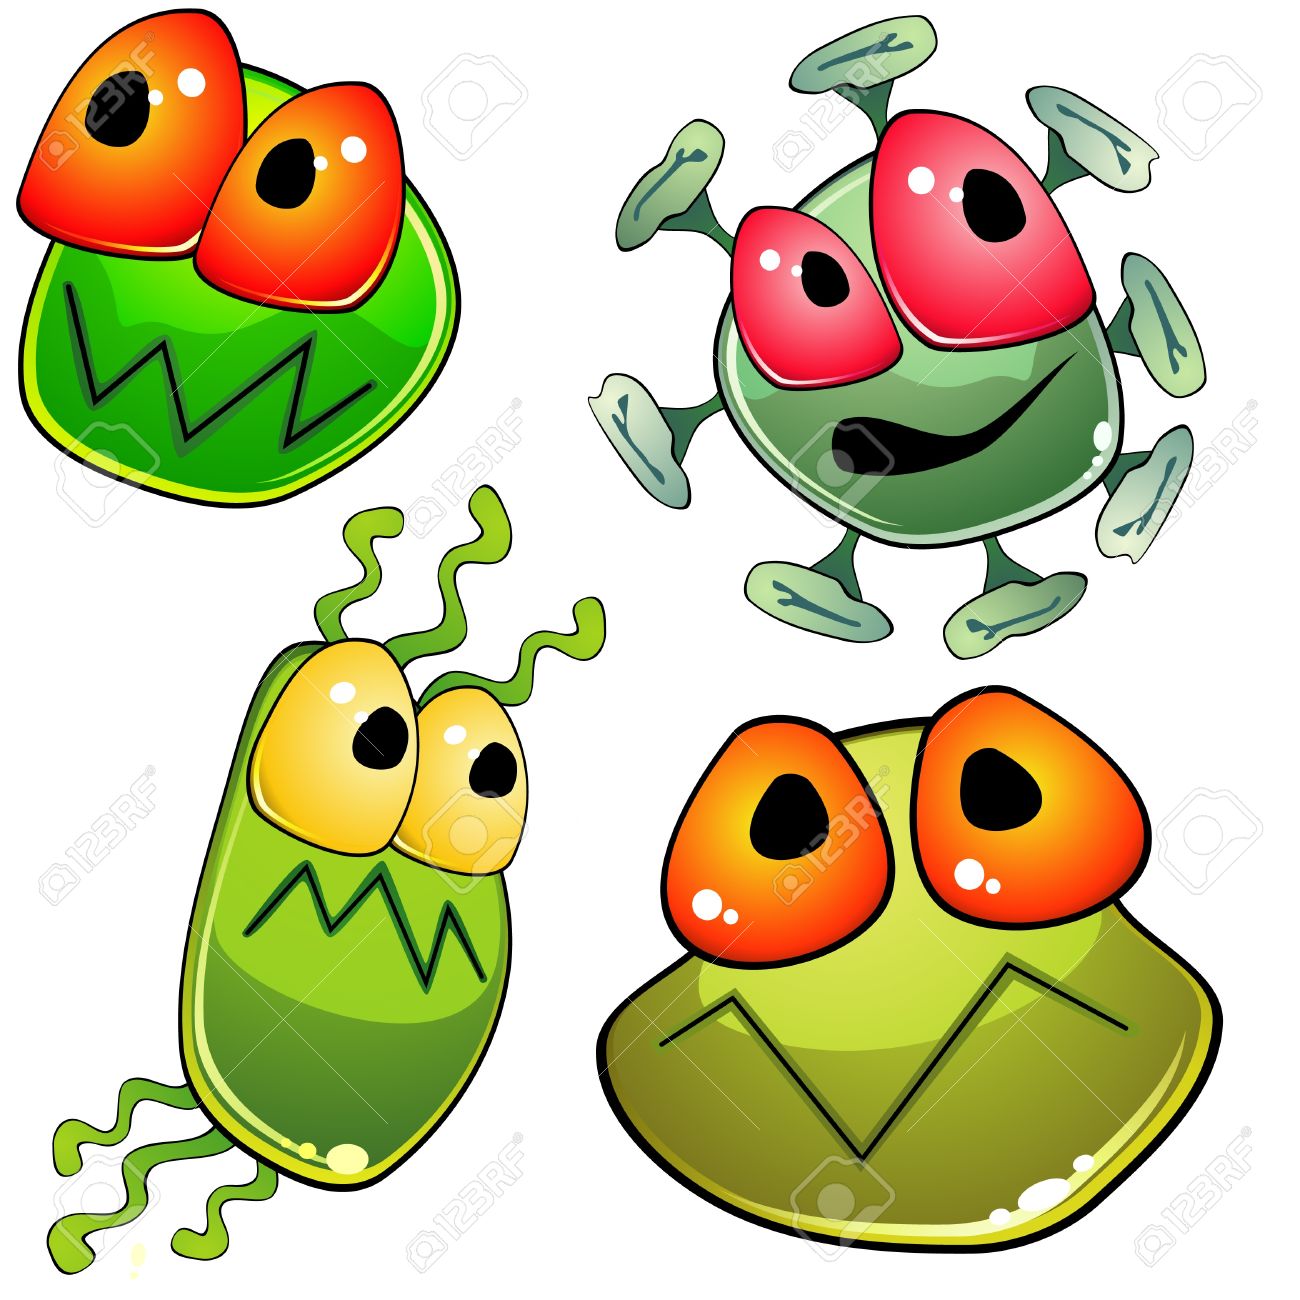 Bacteria microbiology pencil and. Germ clipart microorganism